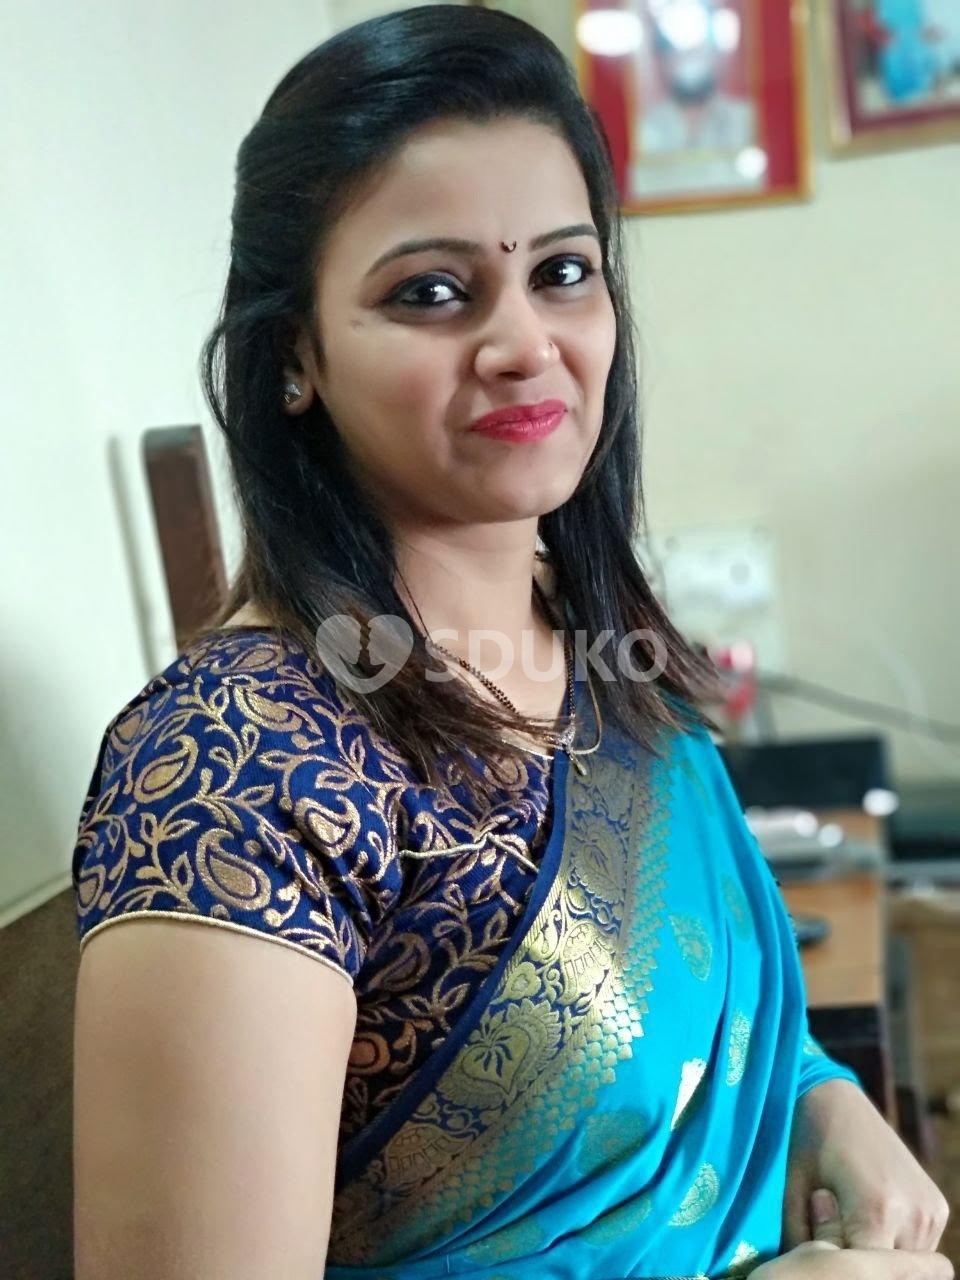 Anna nagar......low price 🥰100% SAFE AND SECURE TODAY LOW PRICE UNLIMITED ENJOY HOT COLLEGE GIRL HOUSEWIFE AUNTIES AV